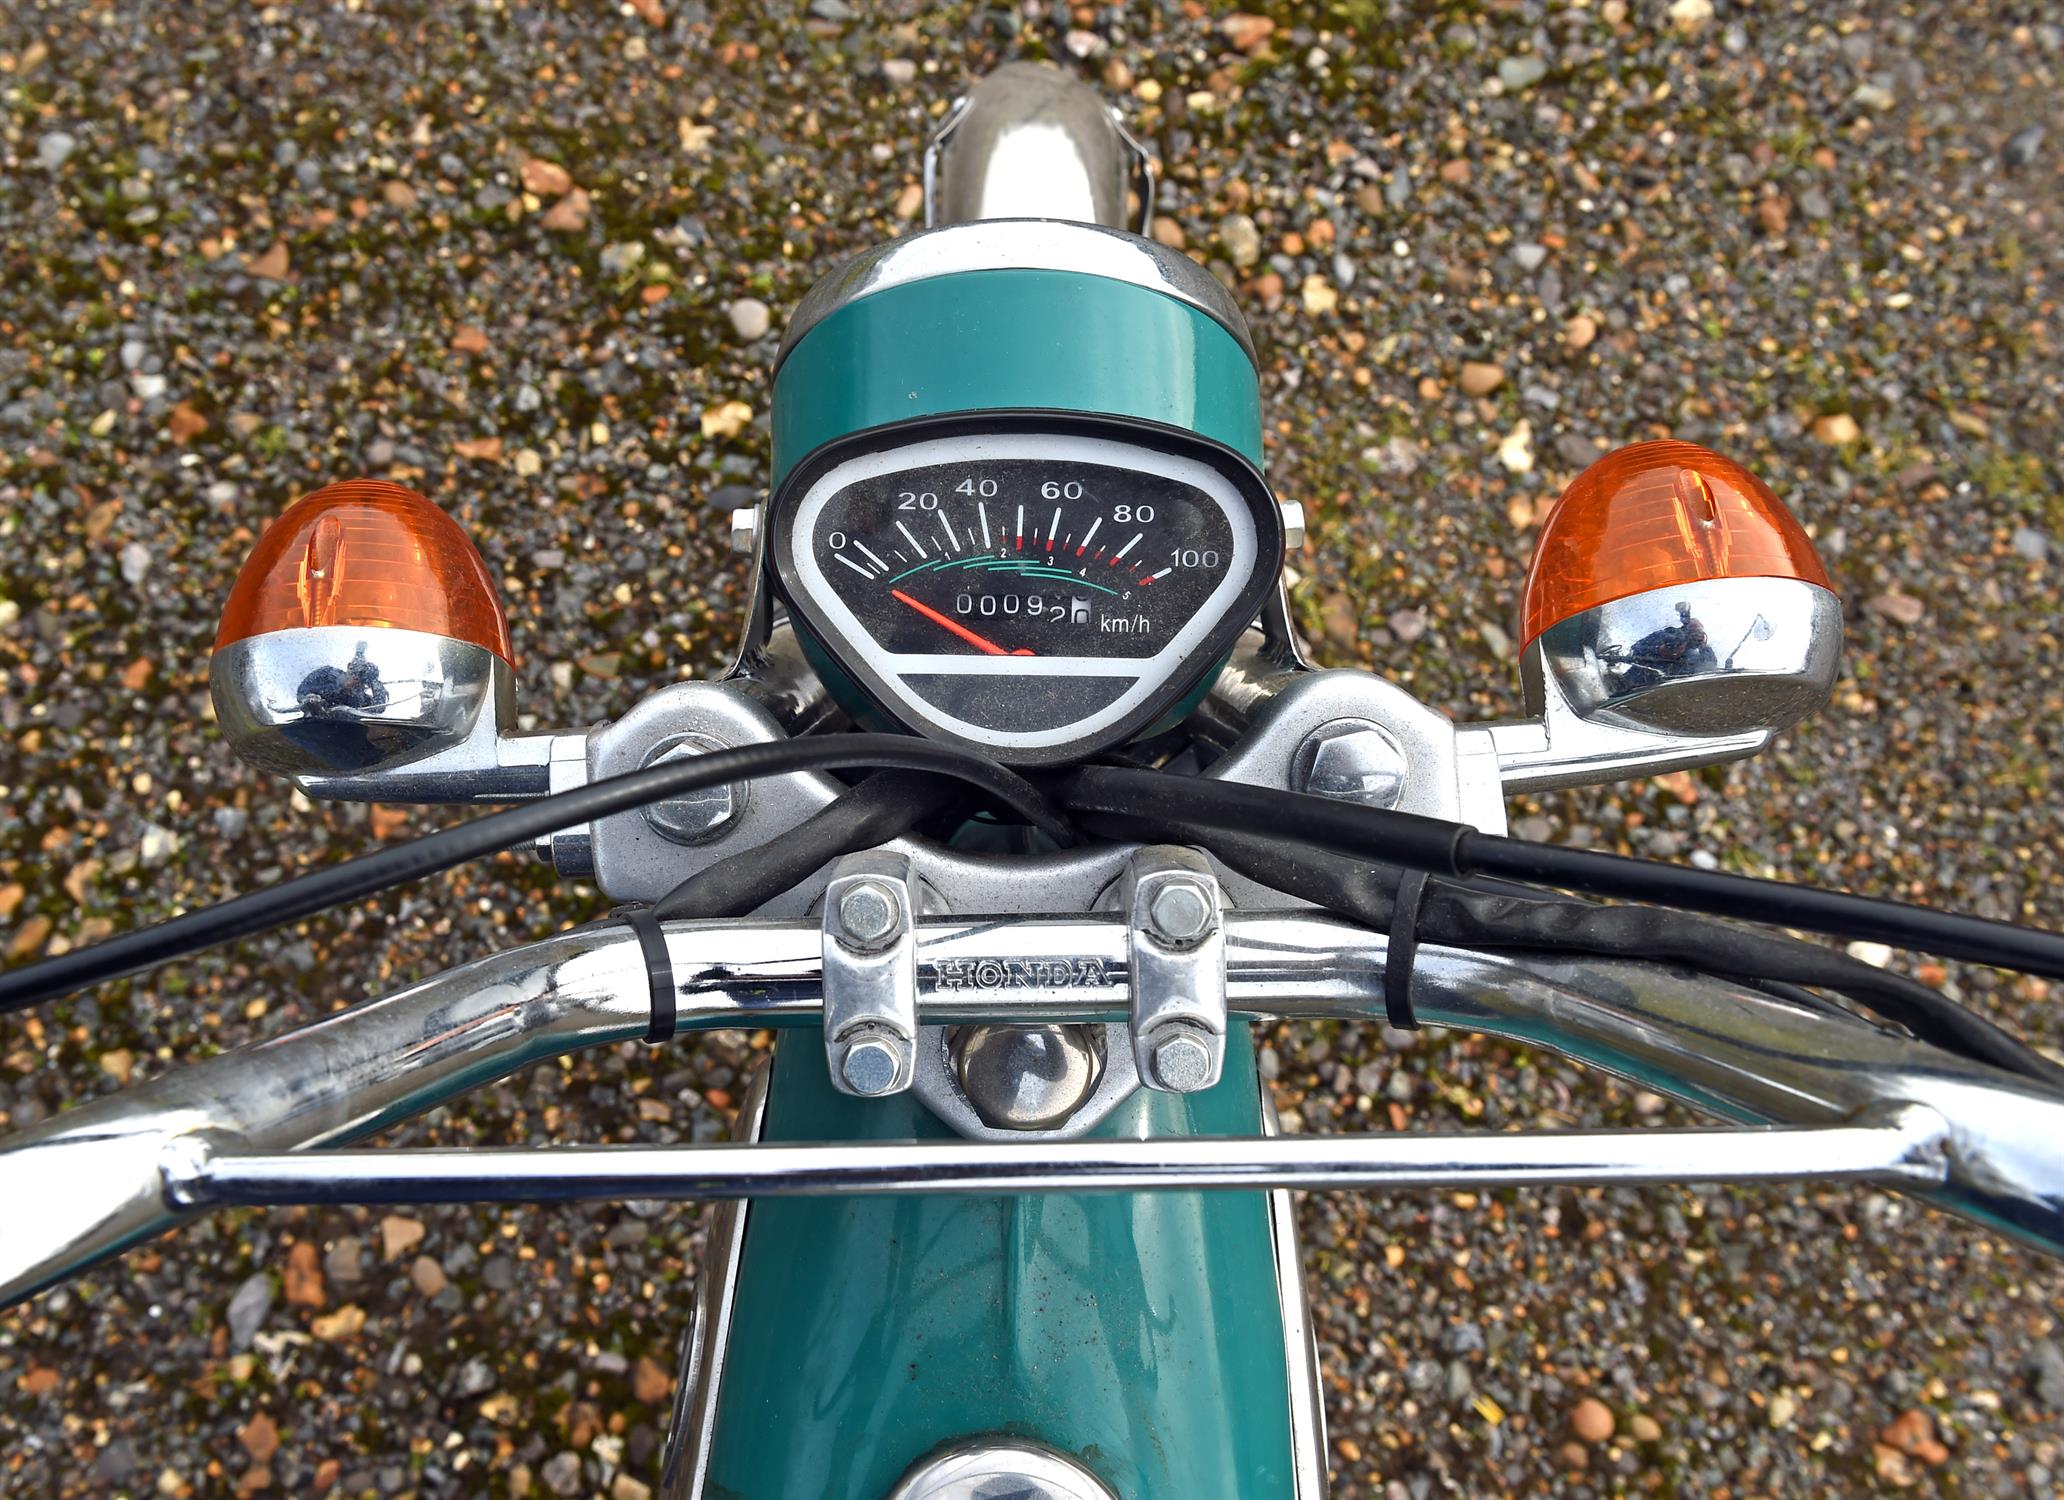 1969 Honda SS50 4 Speed. Registration number: BHY 973H. This Honda SS50 was restored in 2020 prior - Image 9 of 9